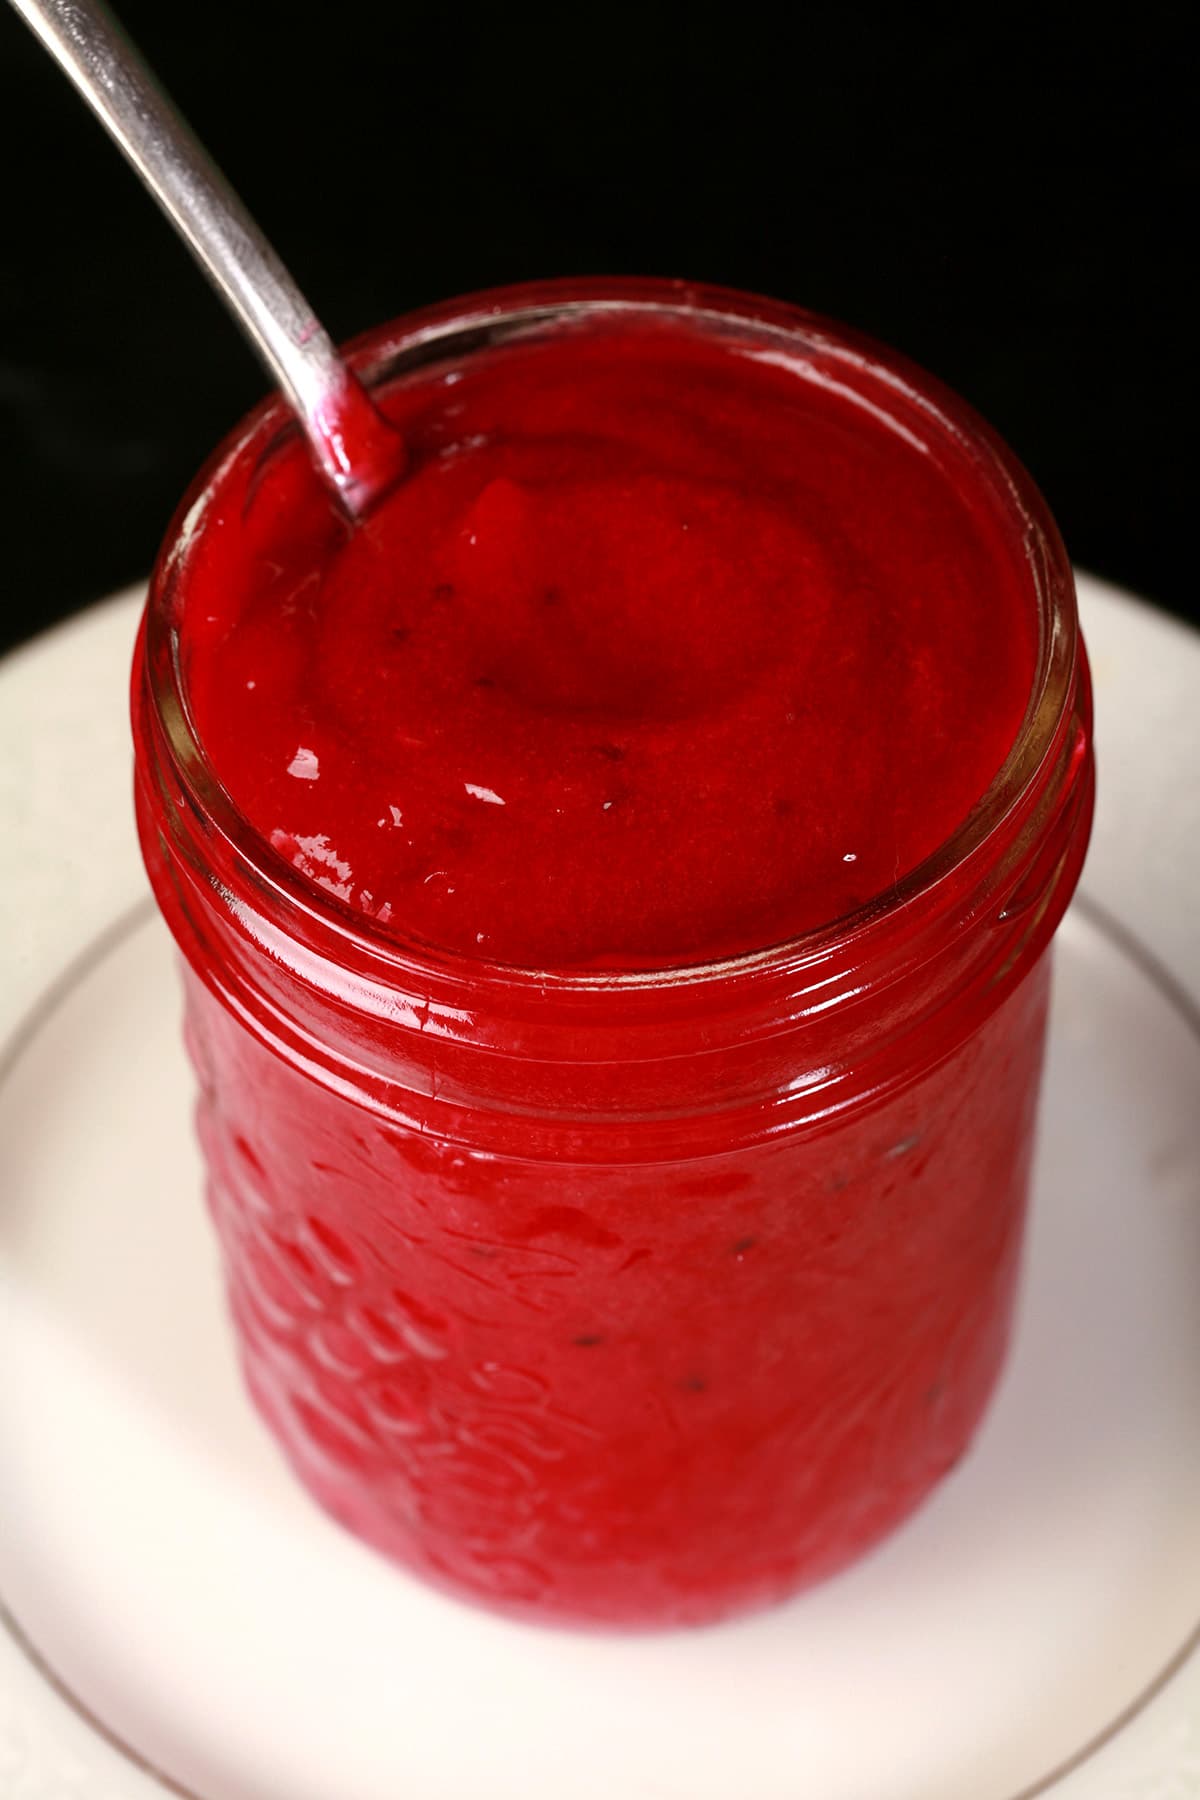 A close up photo of a jar of blackcurrant curd.